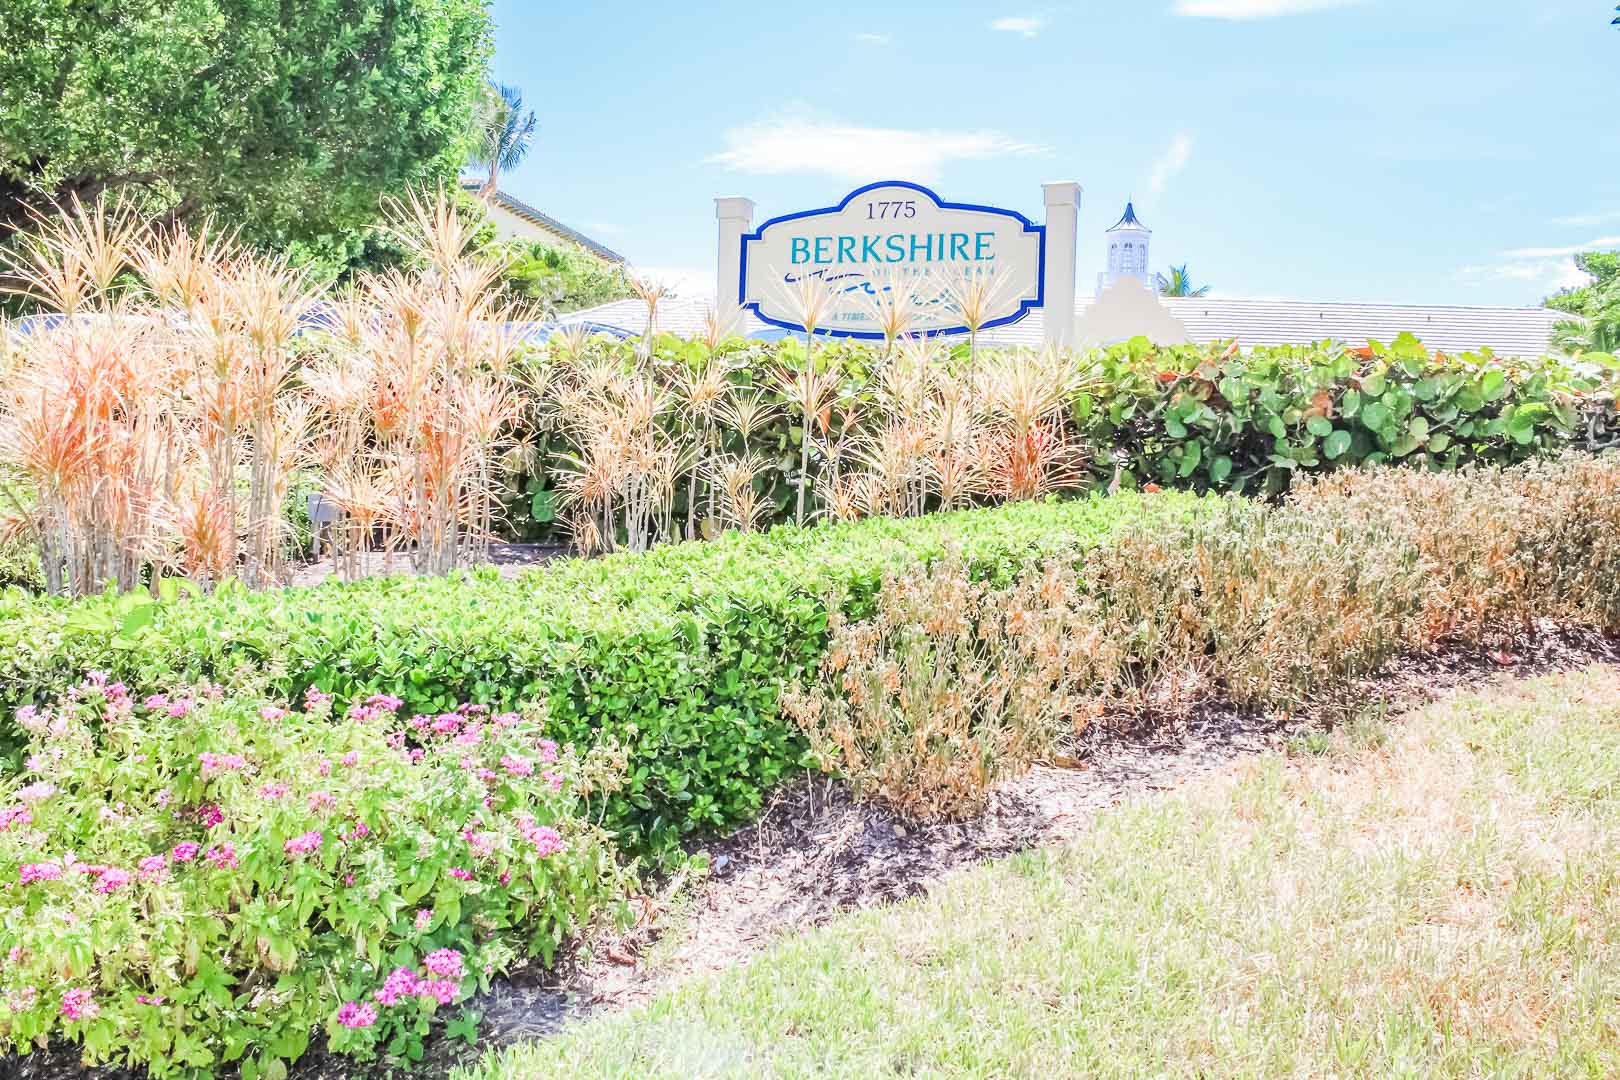 The inviting resort entrance at VRI's Berkshire on the Ocean in Florida.